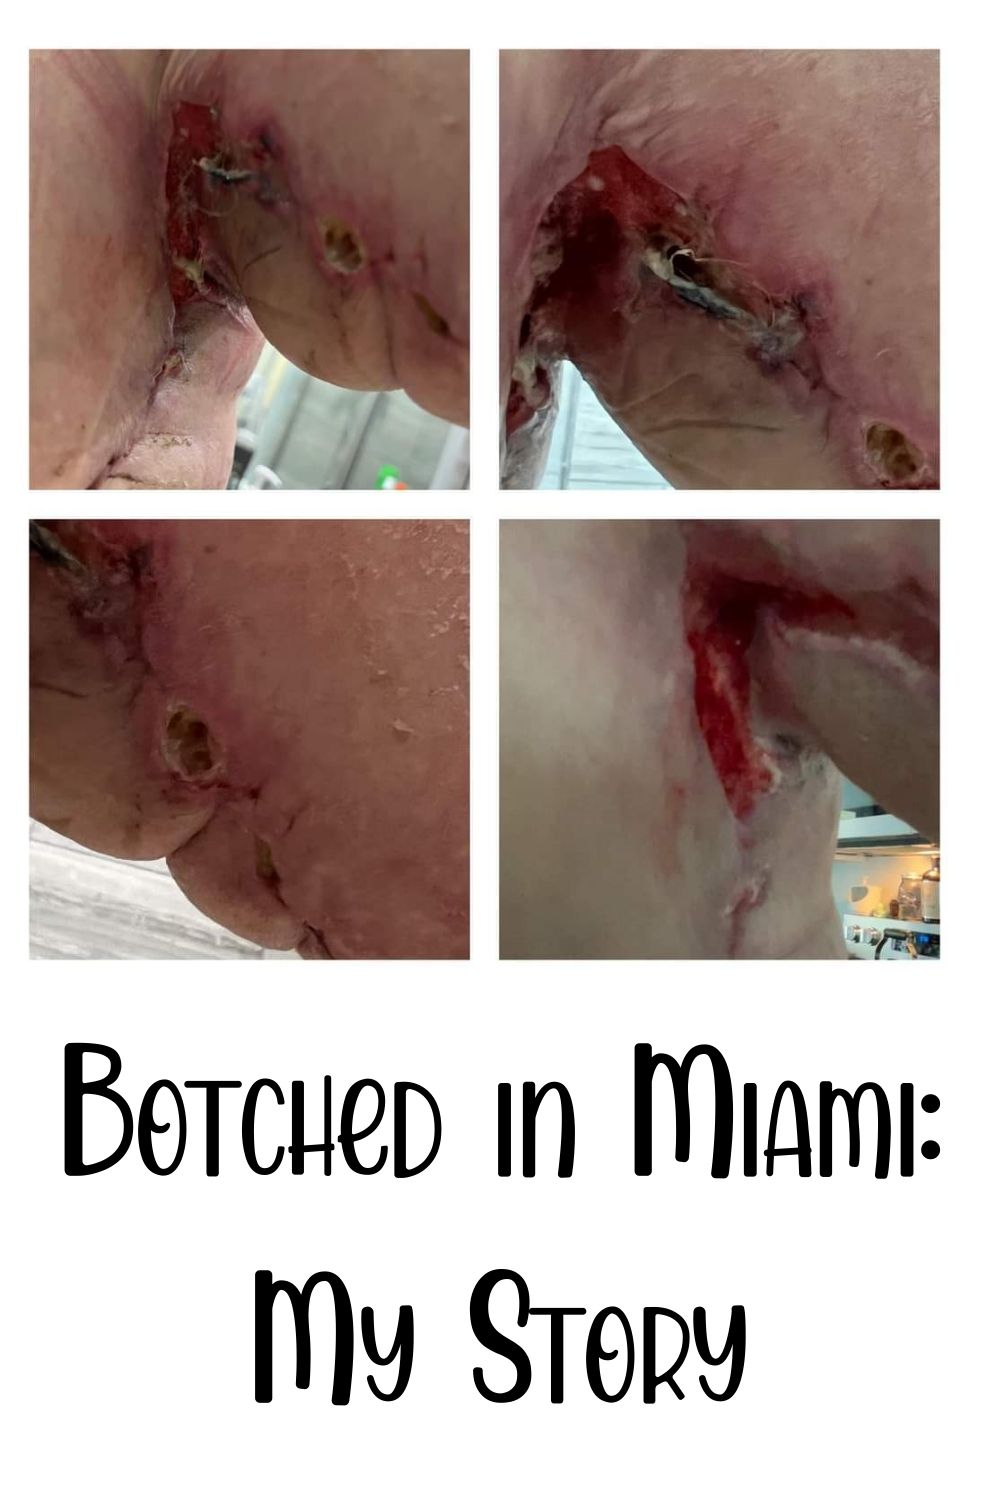 “Botched in Miami”: Ashley P’s Story